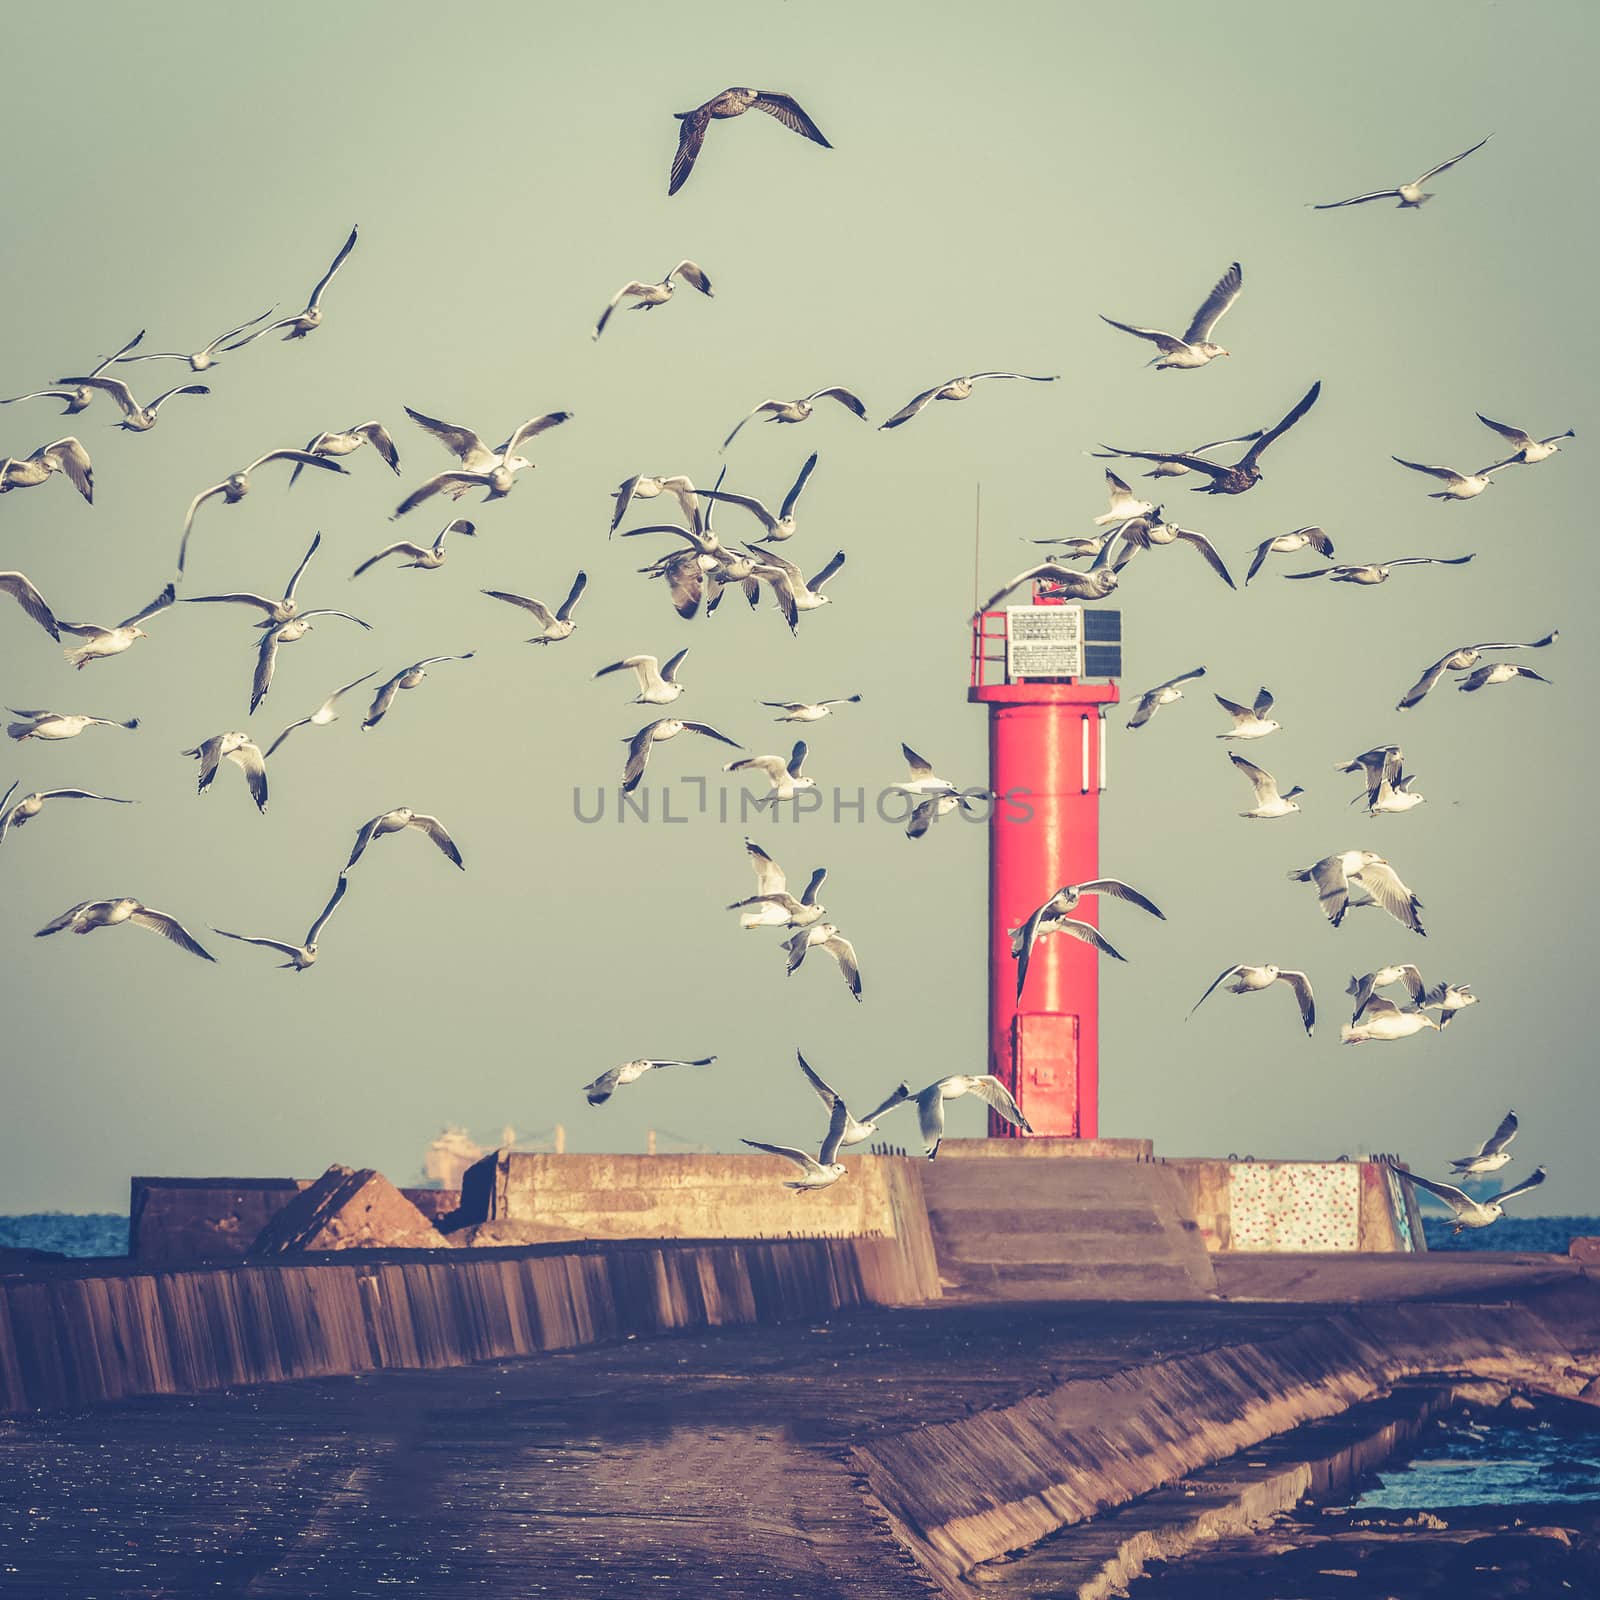 White seagulls flying against the red lighthouse